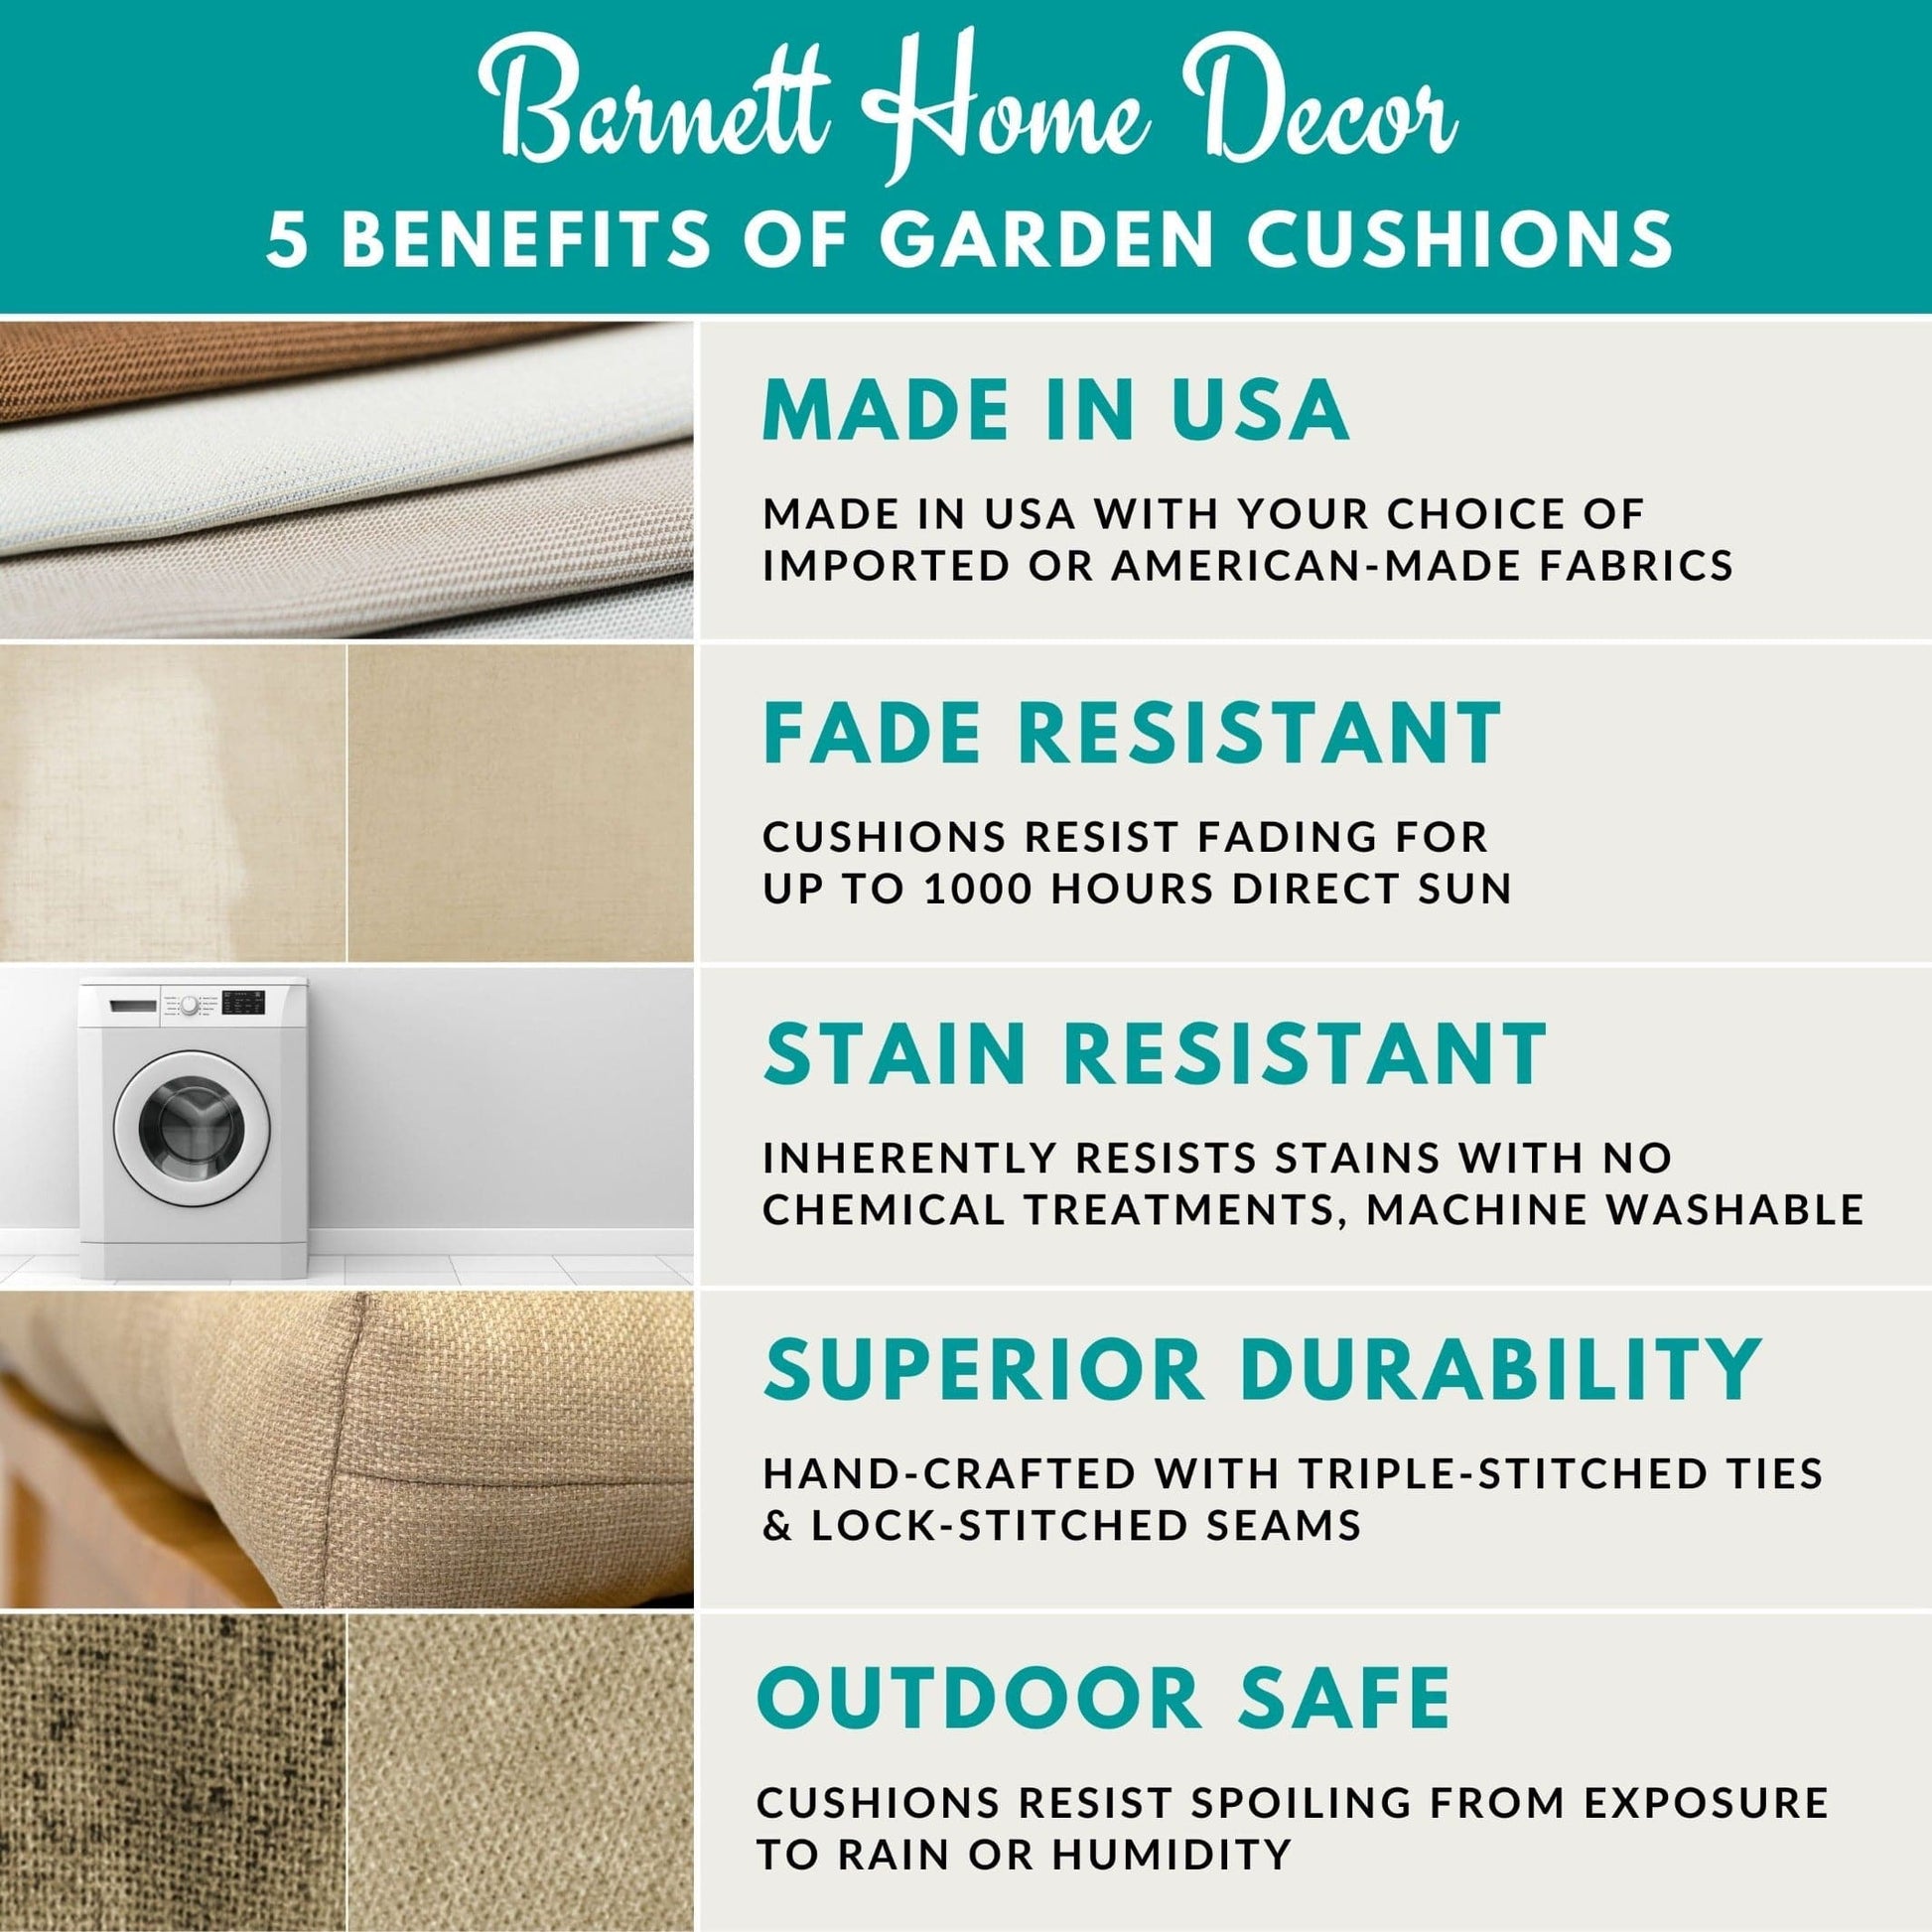 Barnett Home Decor - Benefits of Garden Cushions - Made in USA - Fade Resistant - Stain Resistant - Superior Durability - Outdoor Safe